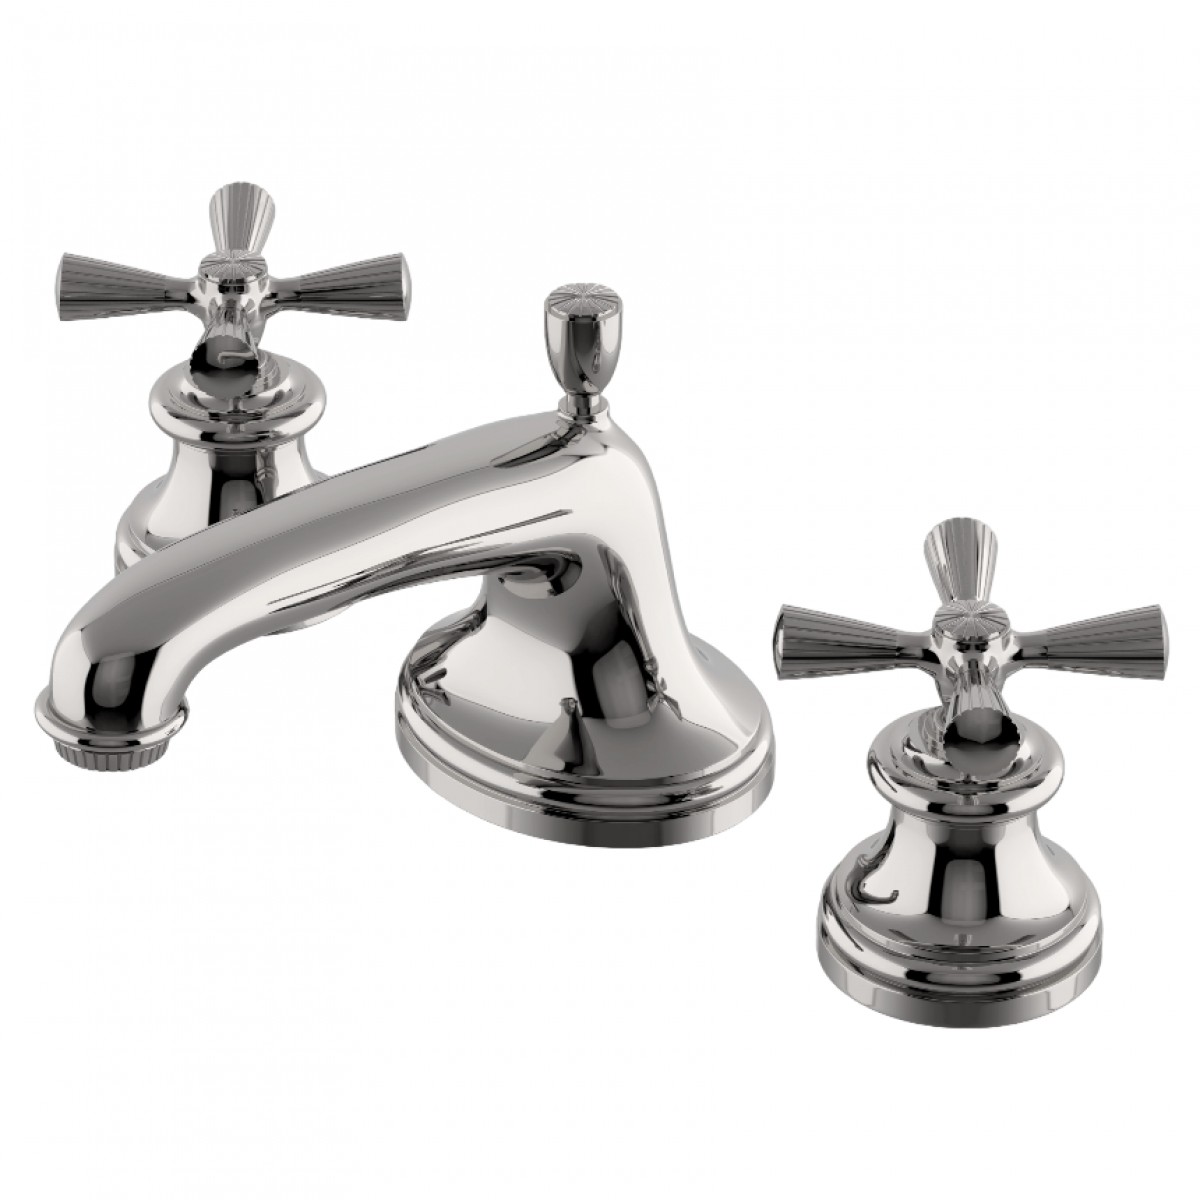 Foro Low Profile Three Hole Deck Mounted Lavatory Faucet with Metal Cross Handles